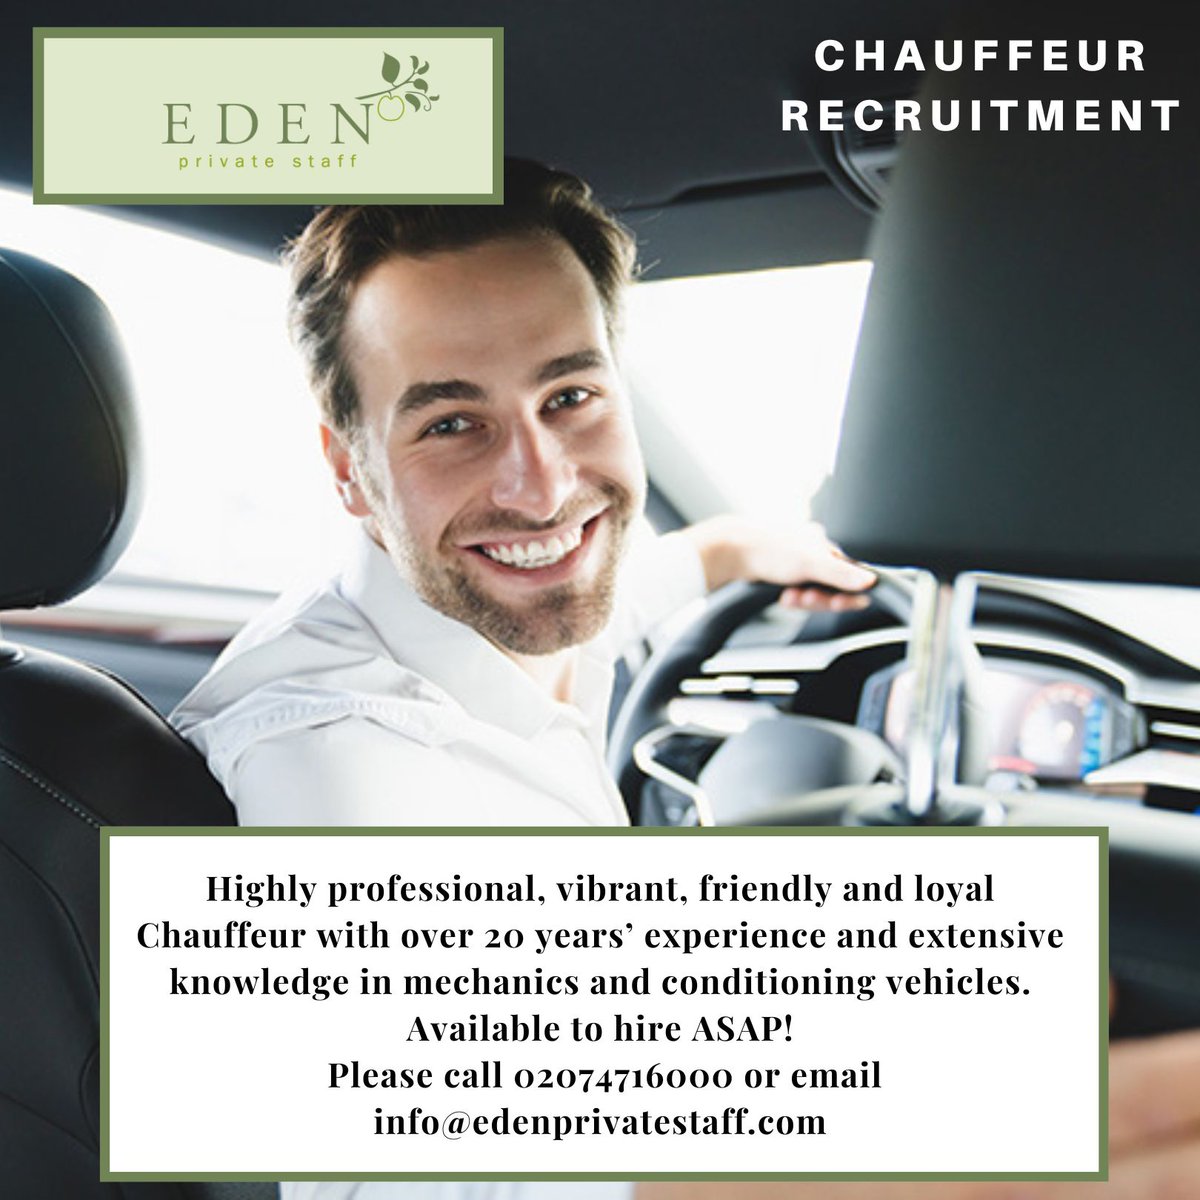 Highly professional Chauffeur Available ASAP please call 02074716000 or email info@edenprivatestaff.com edenprivatestaff.com/resume/sd-6841… #chauffeur #chauffeurjob #chauffeurs #chauffeurservice #privatechauffeur #privatestaff #familyoffice #corporatechauffeur #findachauffeur